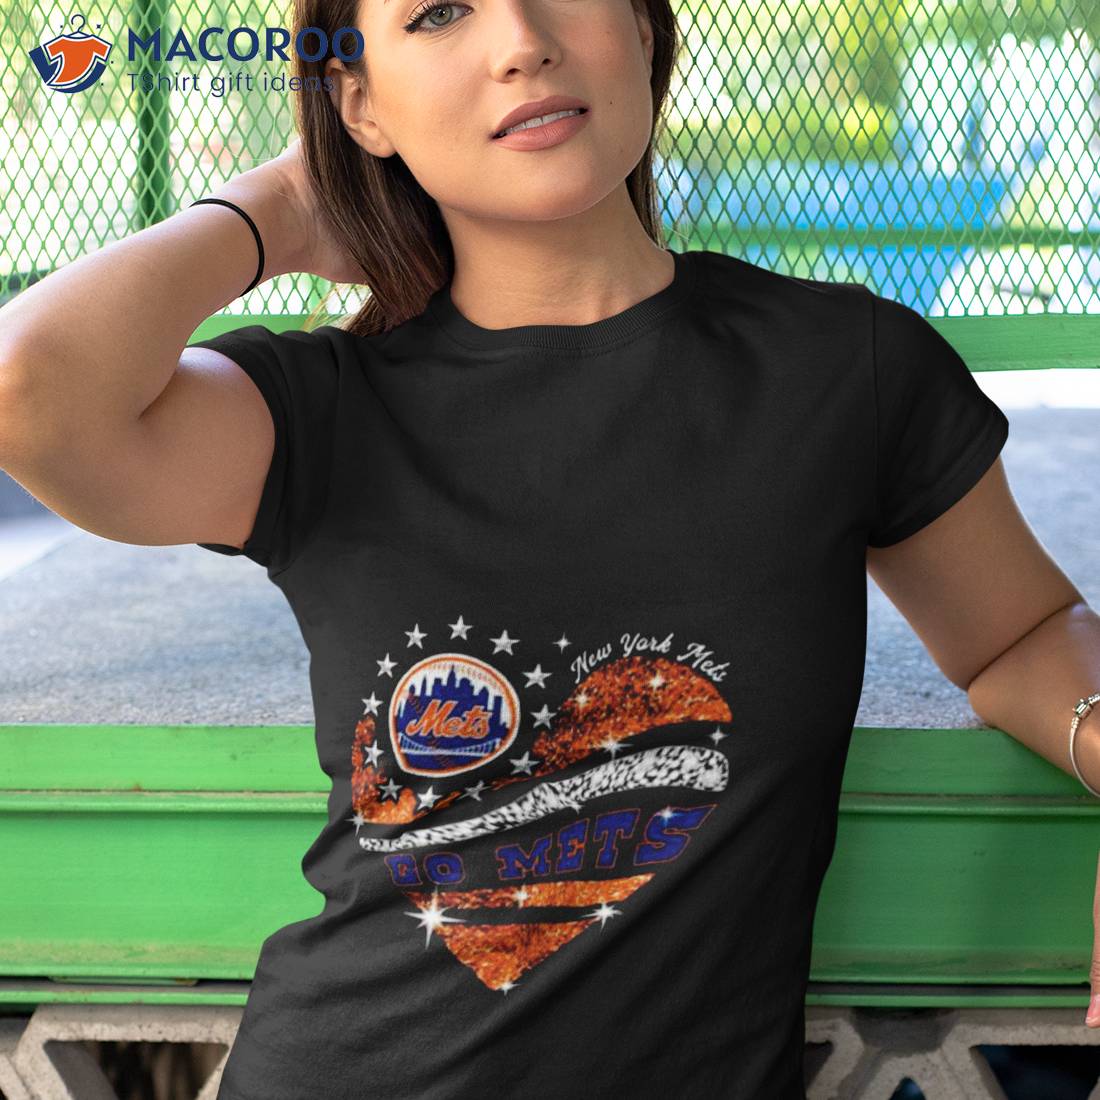 mets tee shirts for sale